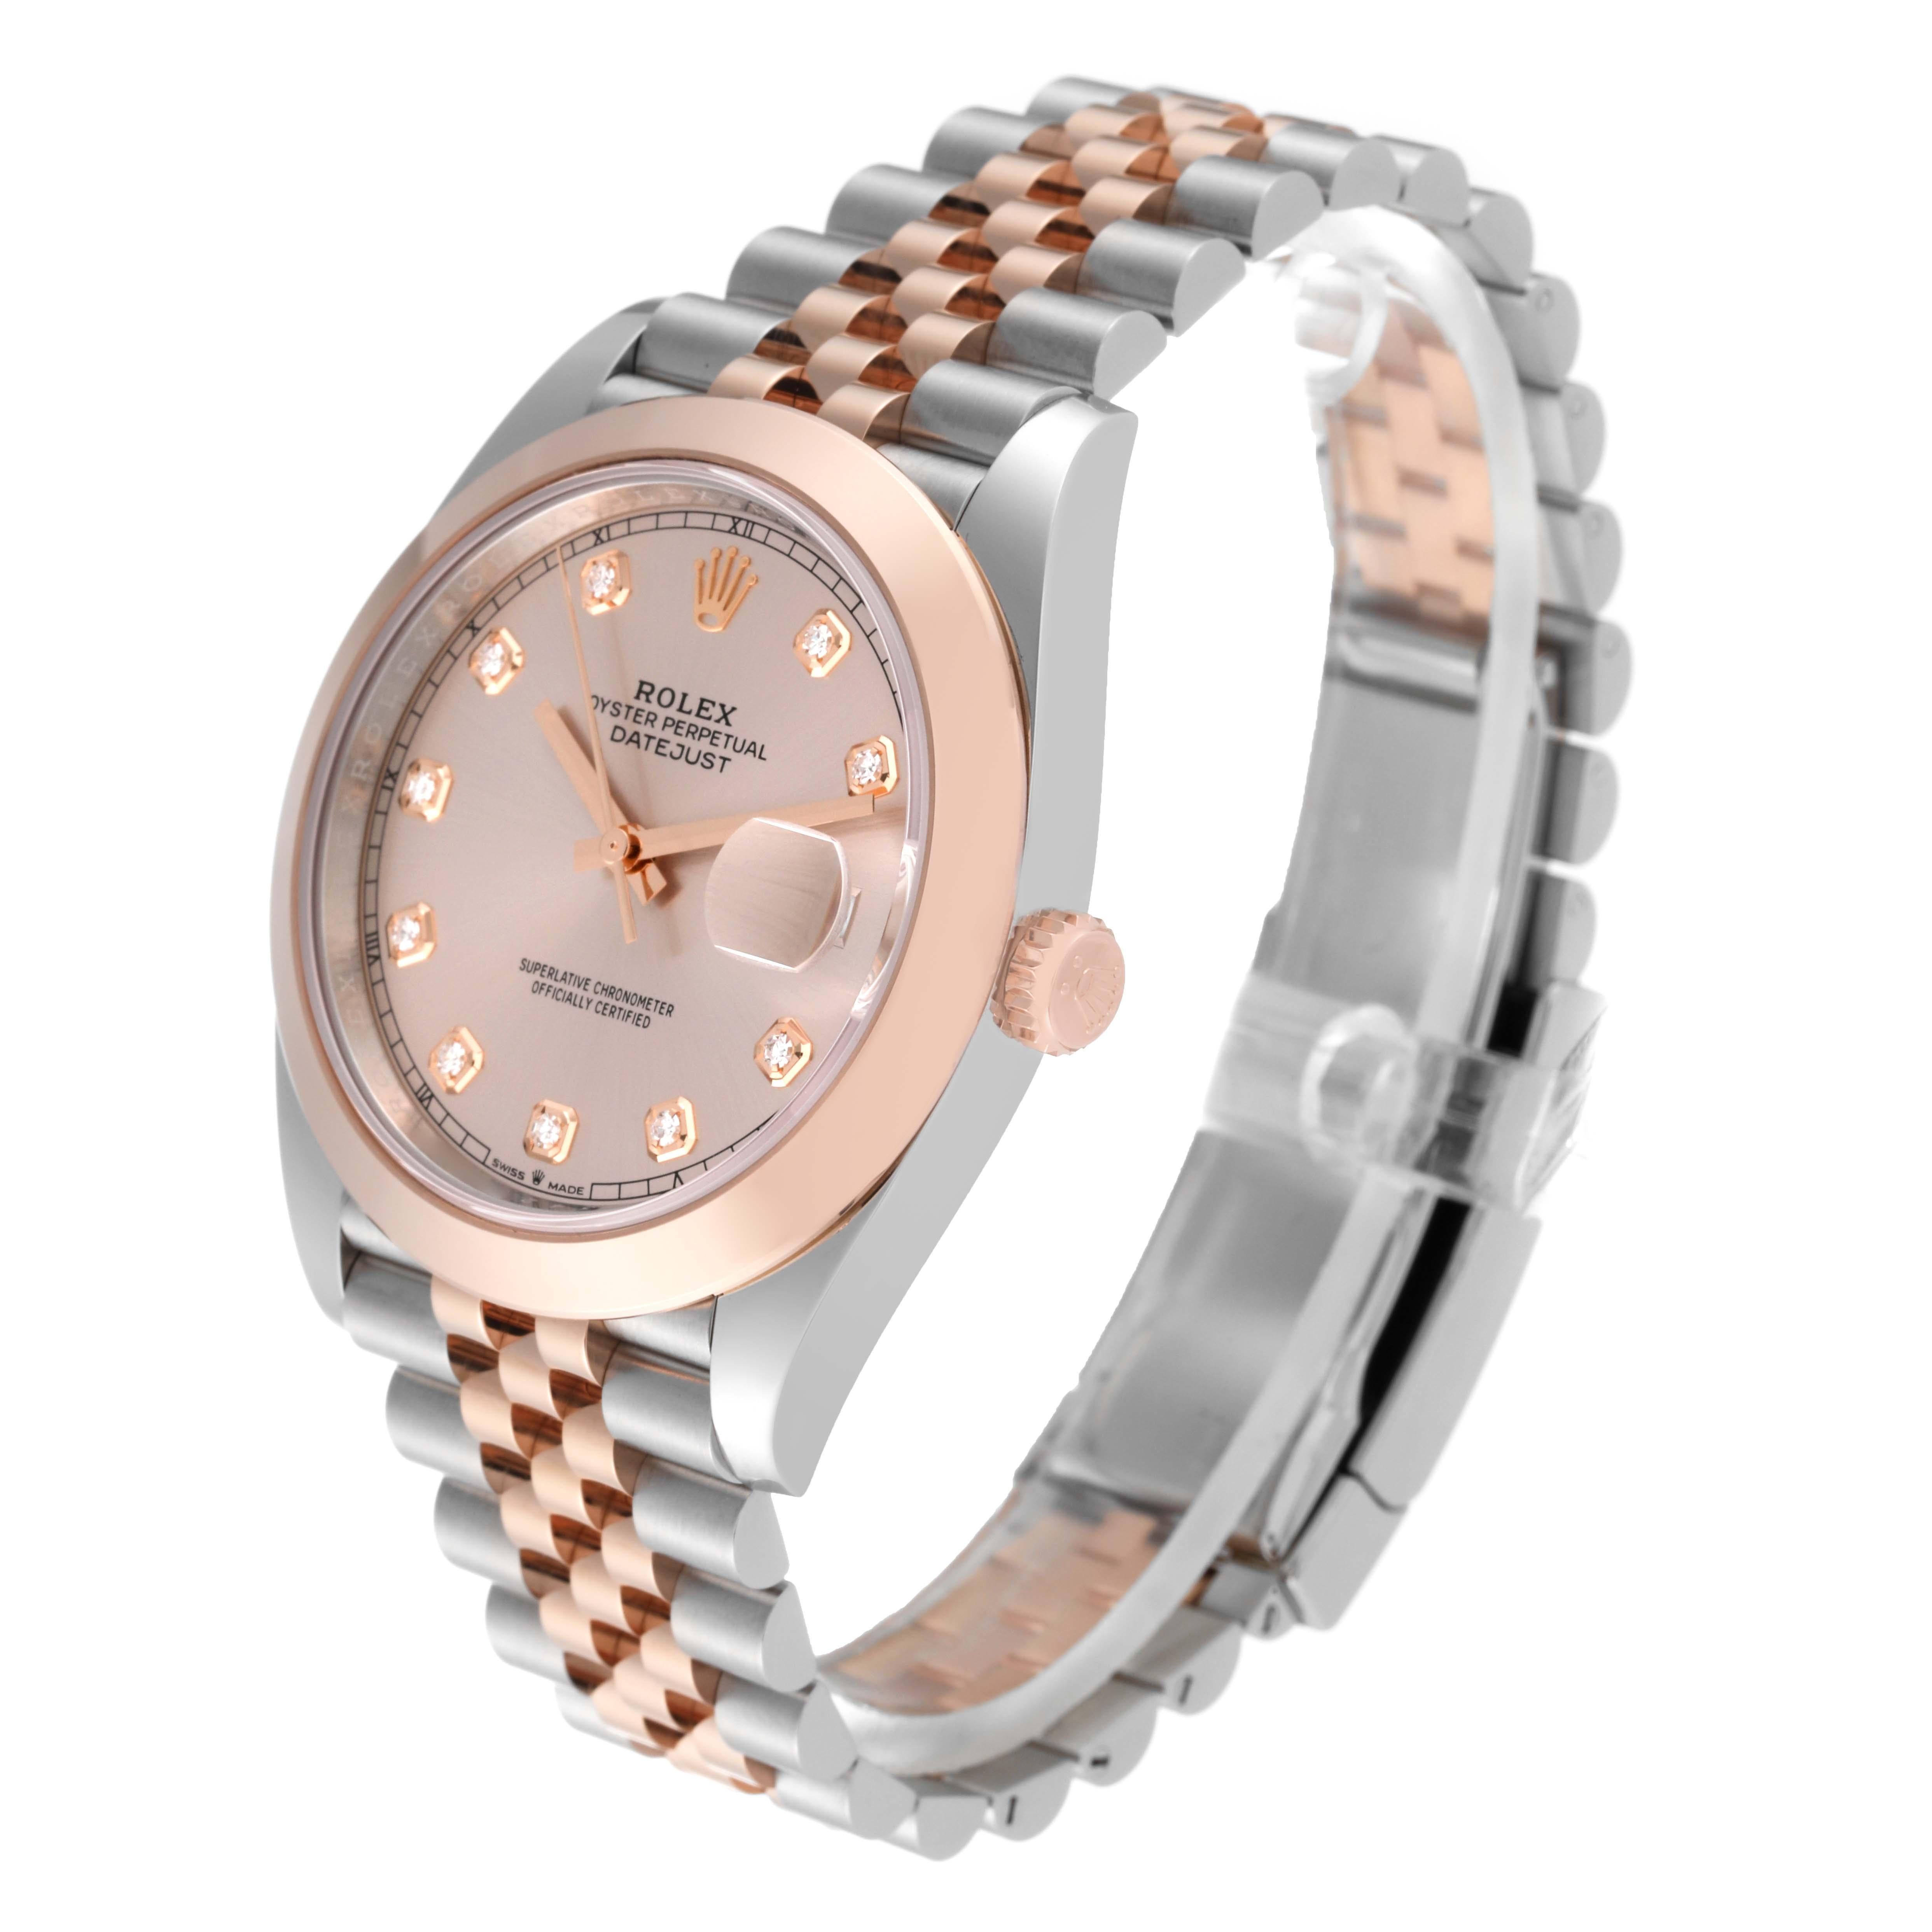 Rolex Datejust 41 Steel Rose Gold Diamond Dial Mens Watch 126301 Box Card For Sale 5